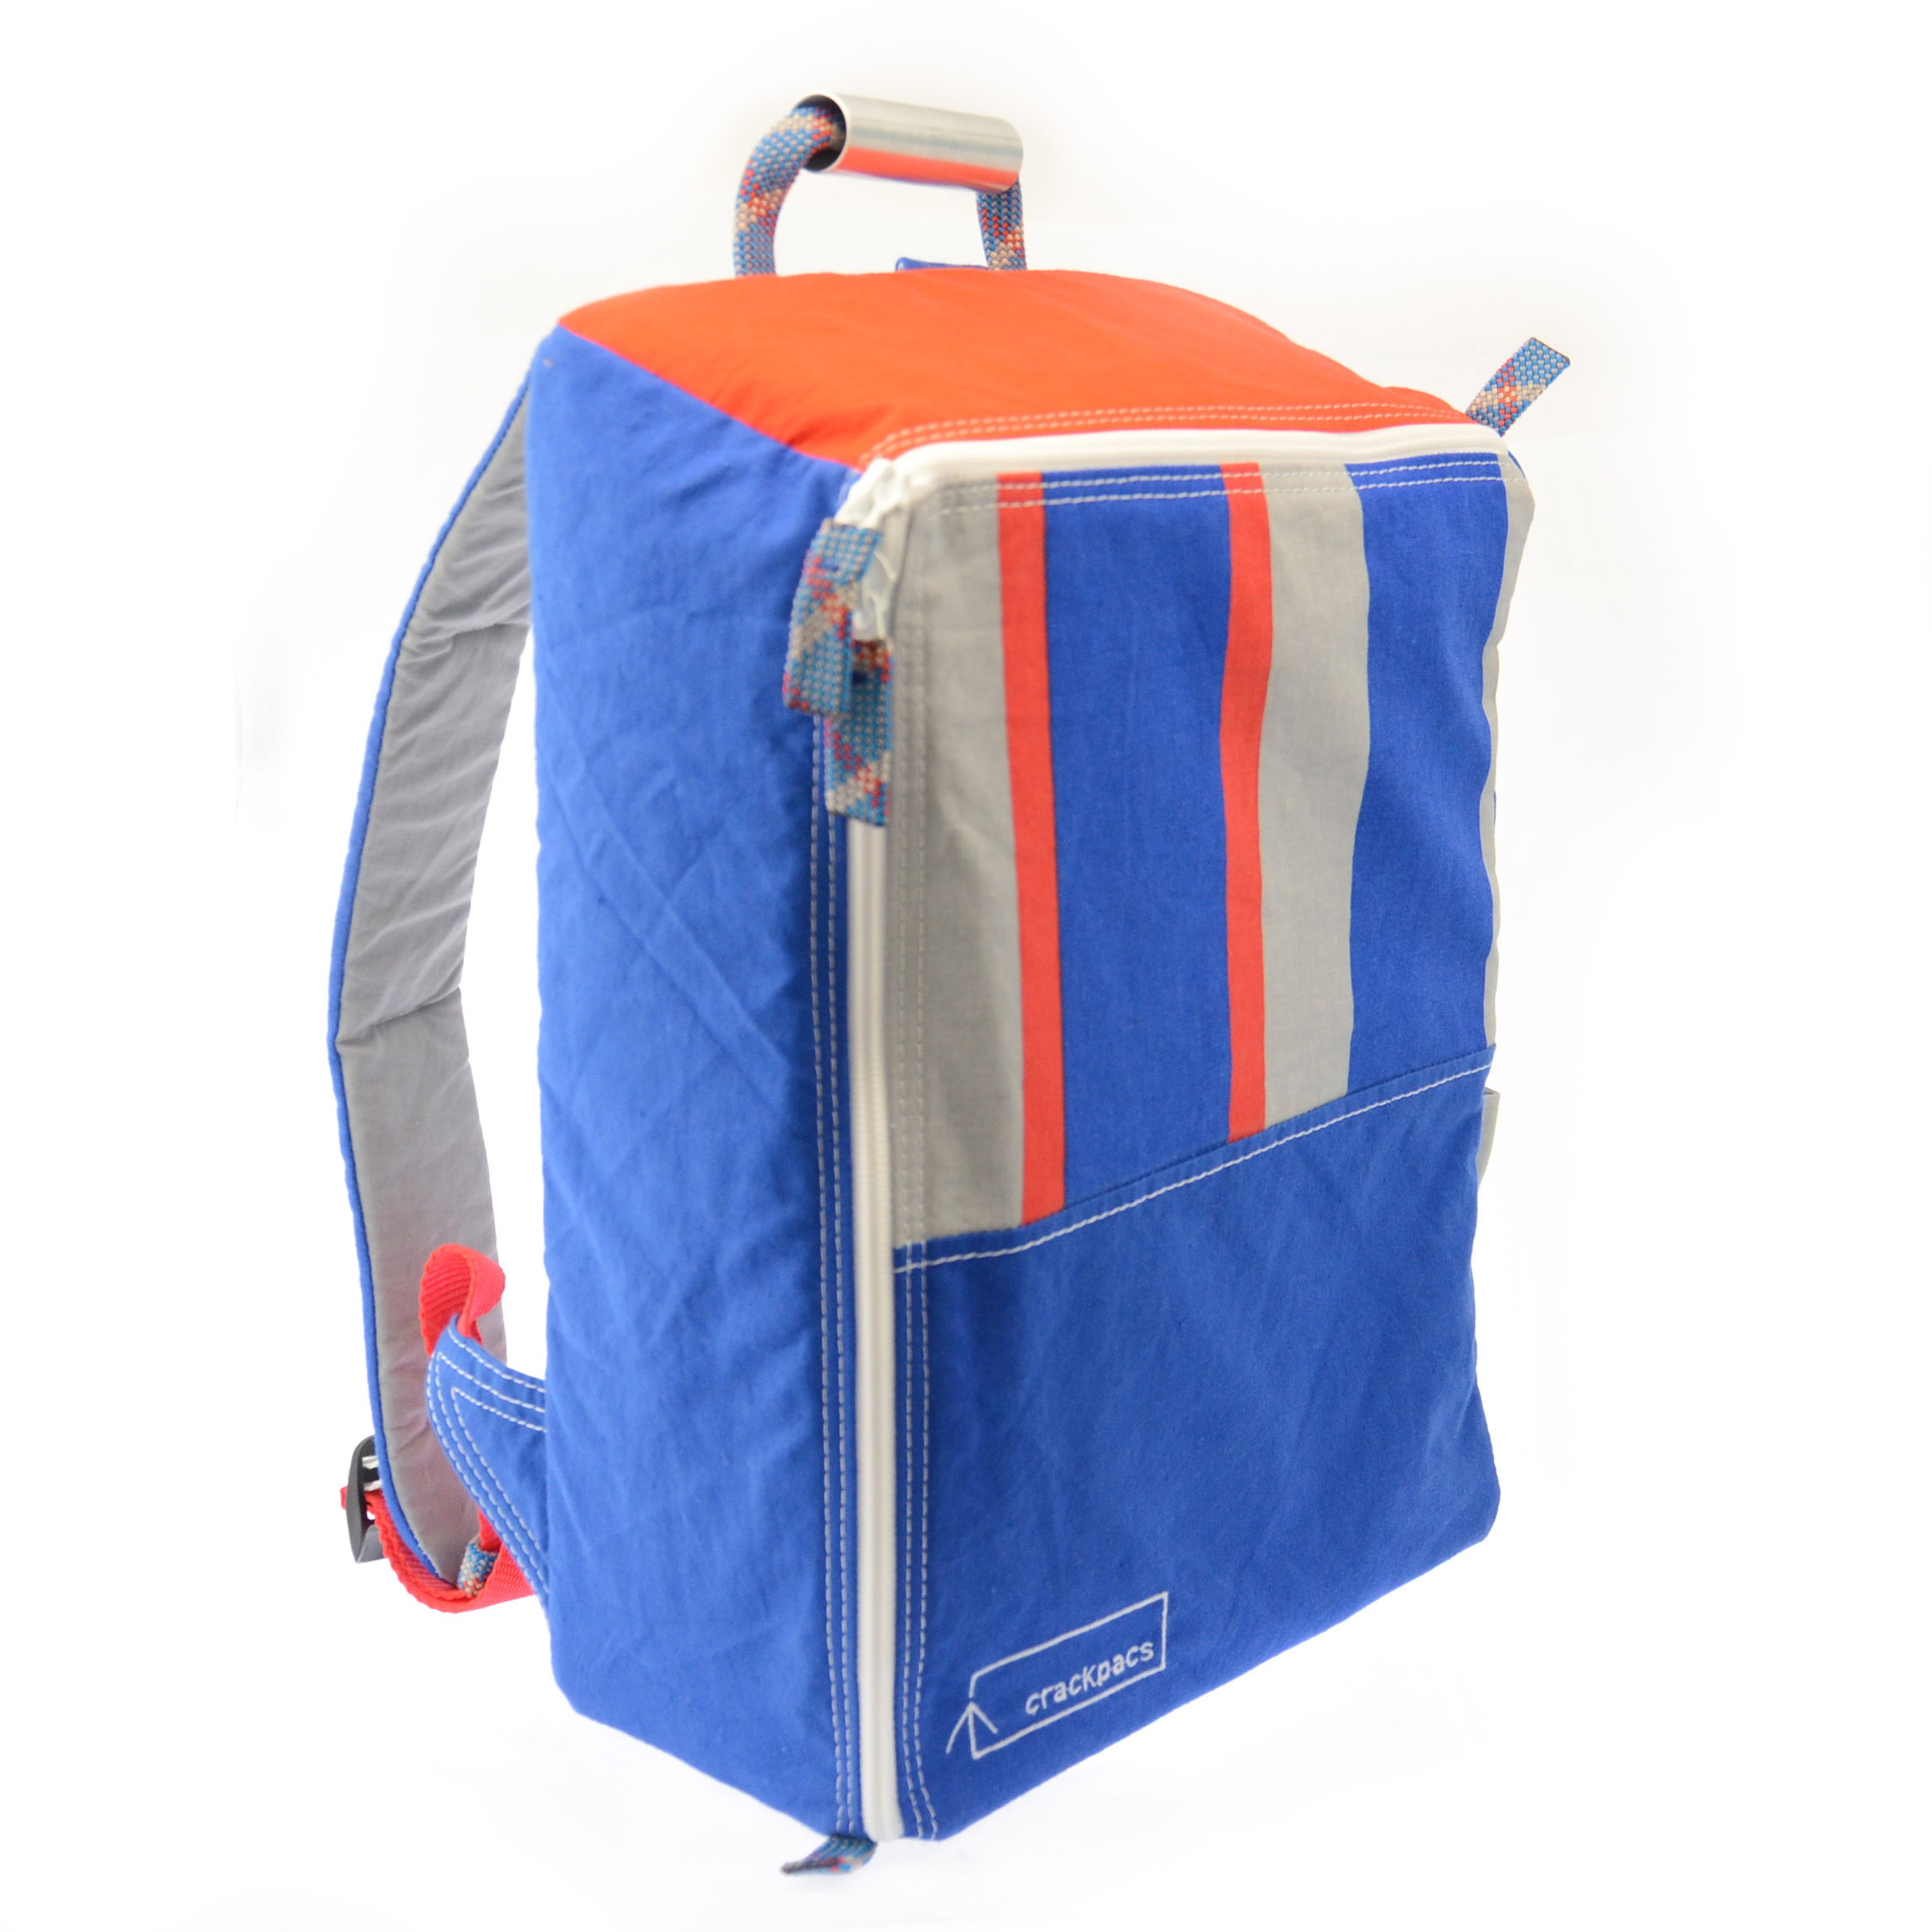 canvas backpacks - the pitch 1000 is created from reclaimed tents